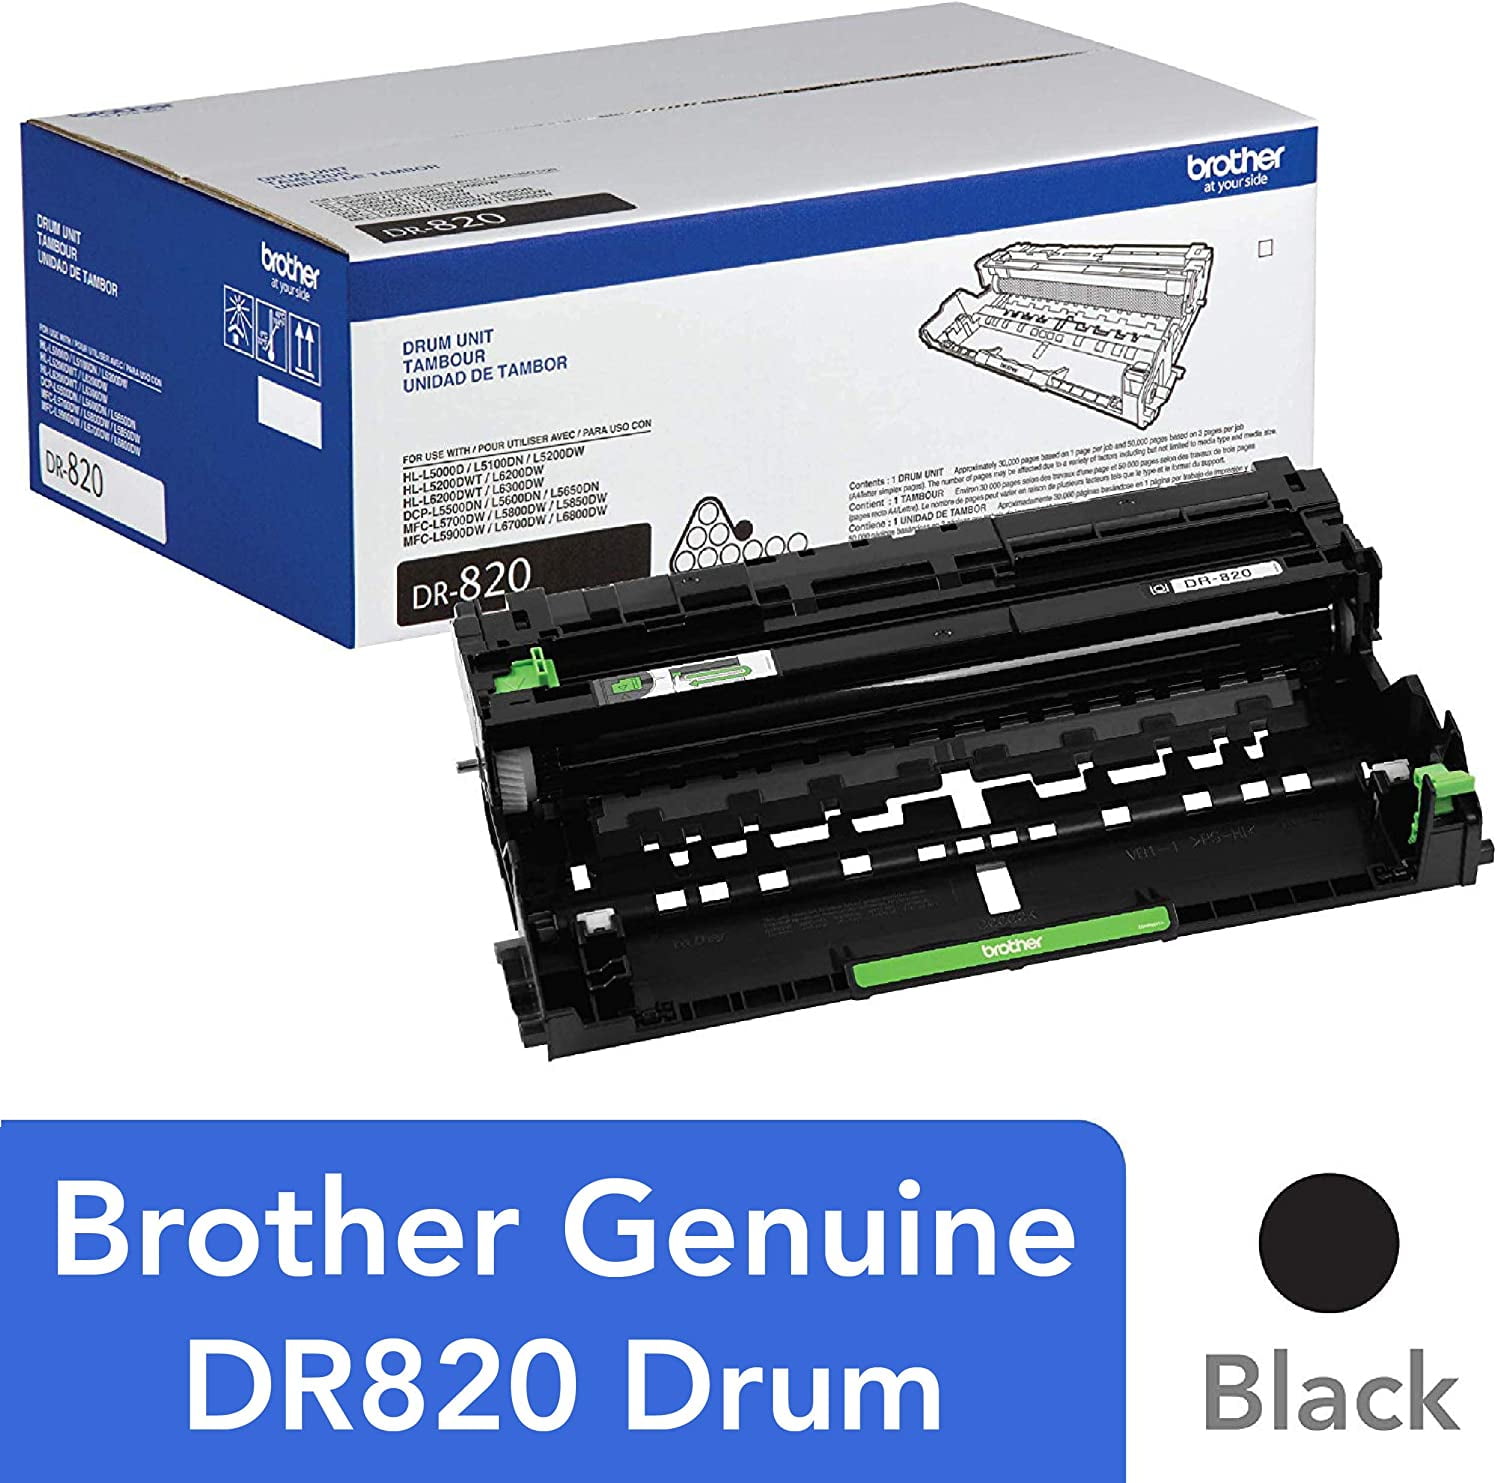 Brother Genuine Drum Unit, DR820, Yields Up to 30,000 Pages, Black 